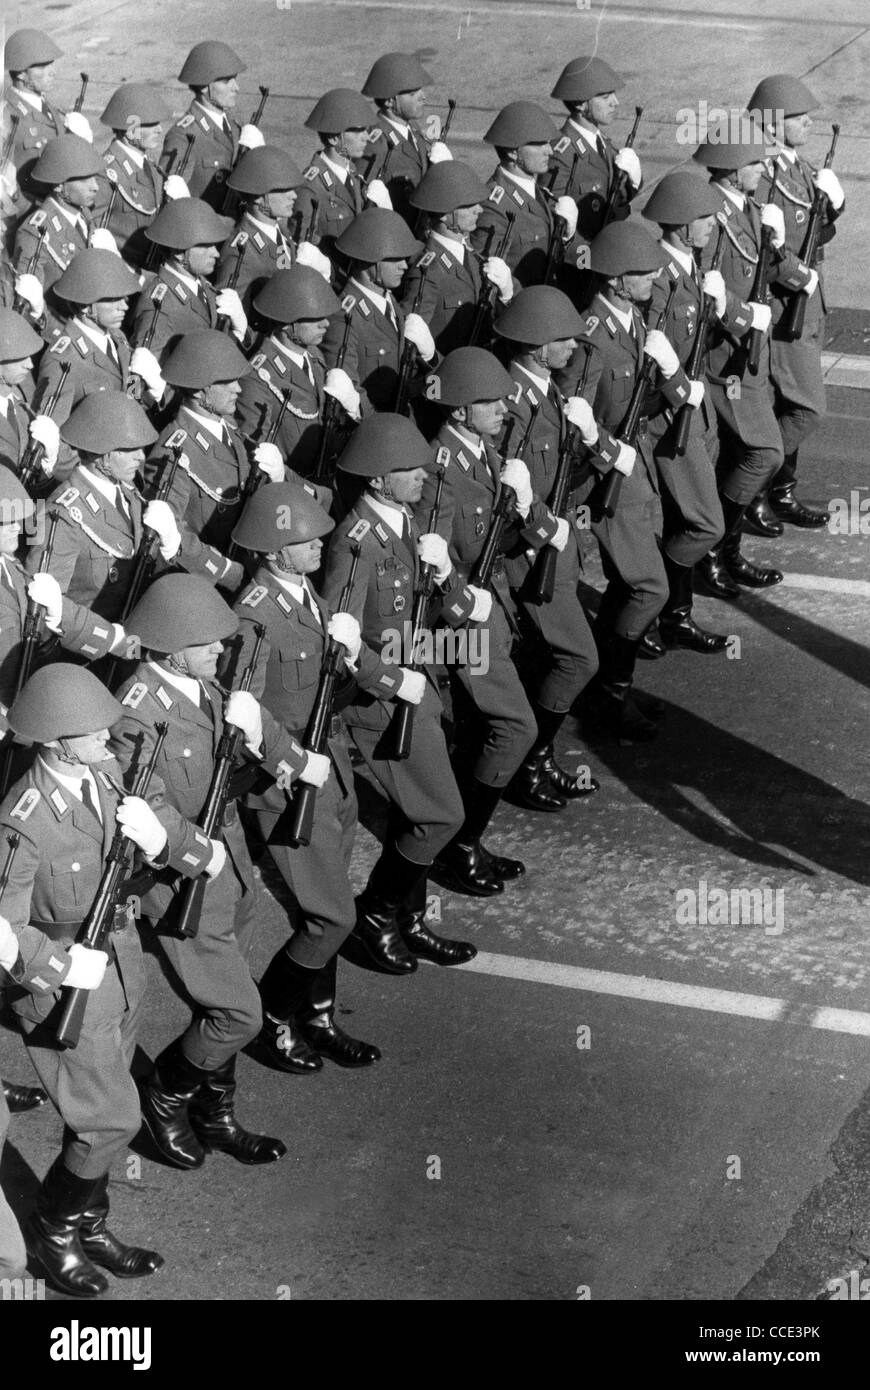 Military parade of the National People's Army of the GDR 1979 in East Berlin. Stock Photo